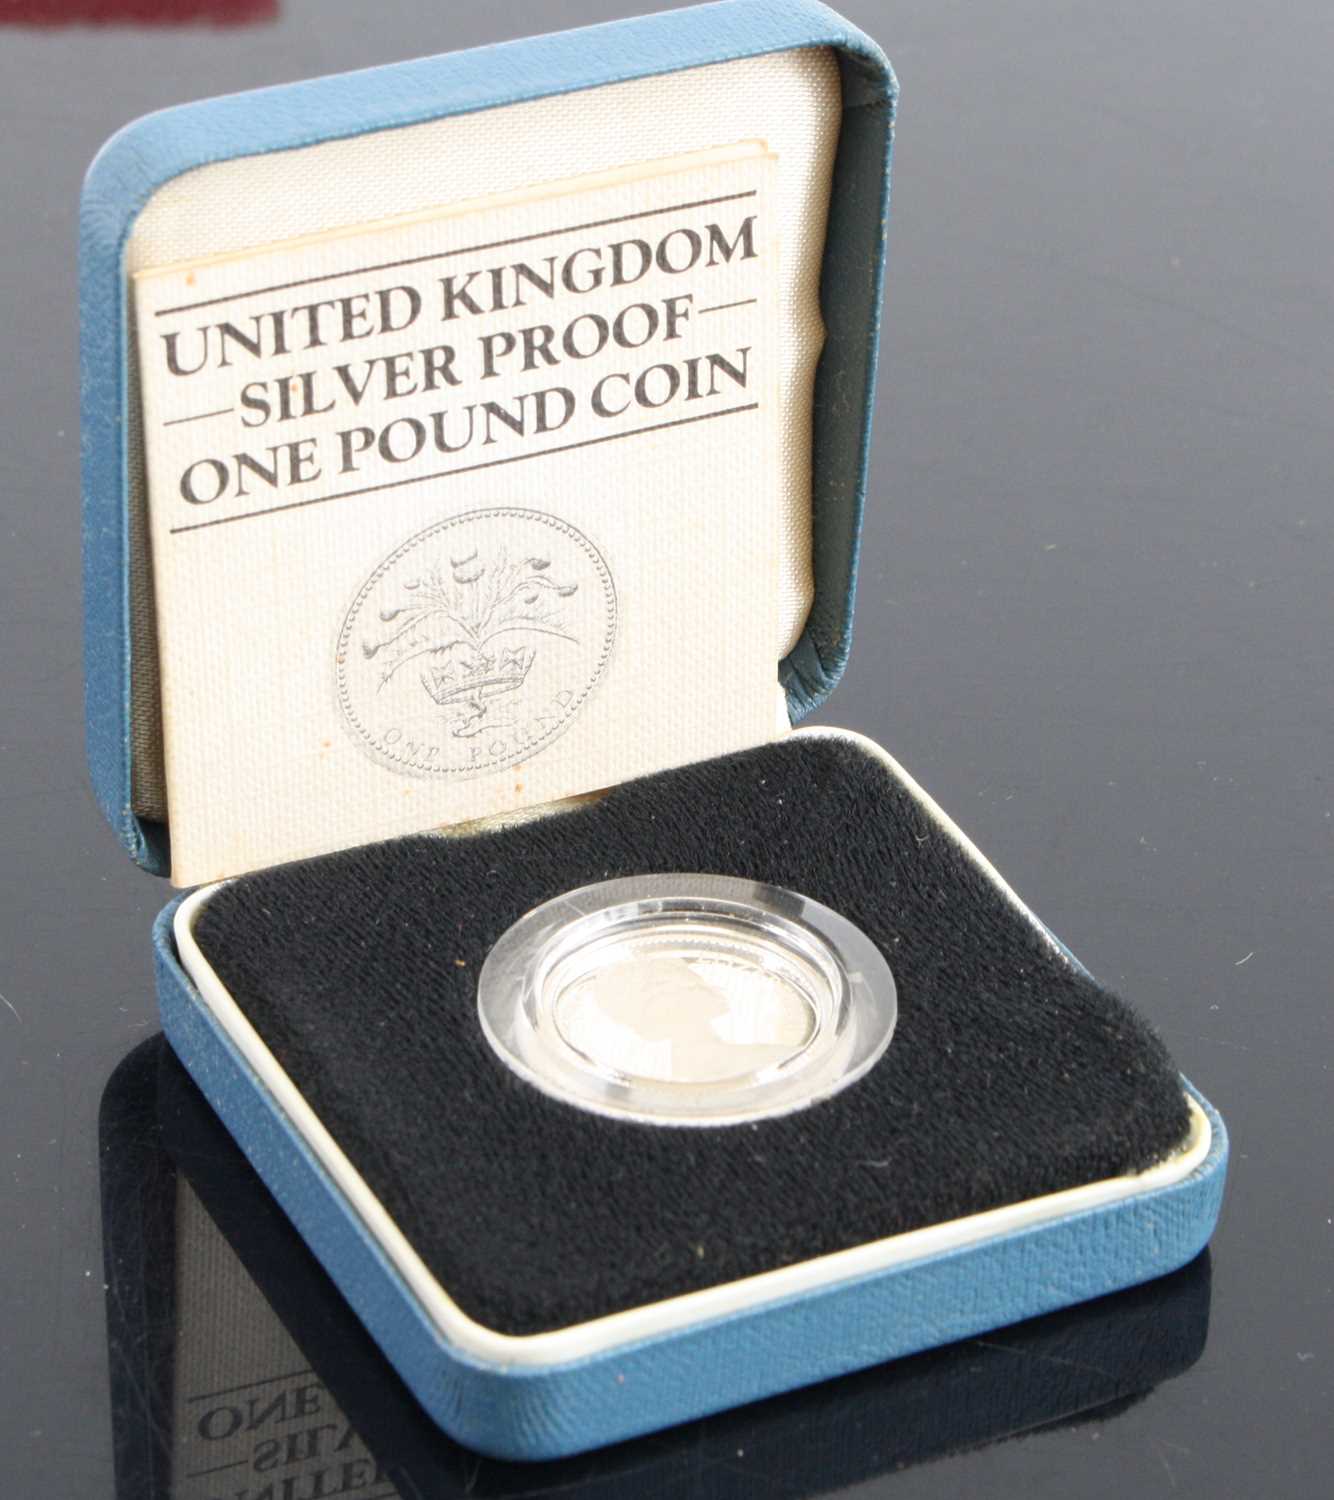 United Kingdom, 1984 silver proof £1 coin, boxed with certificate, together with a small